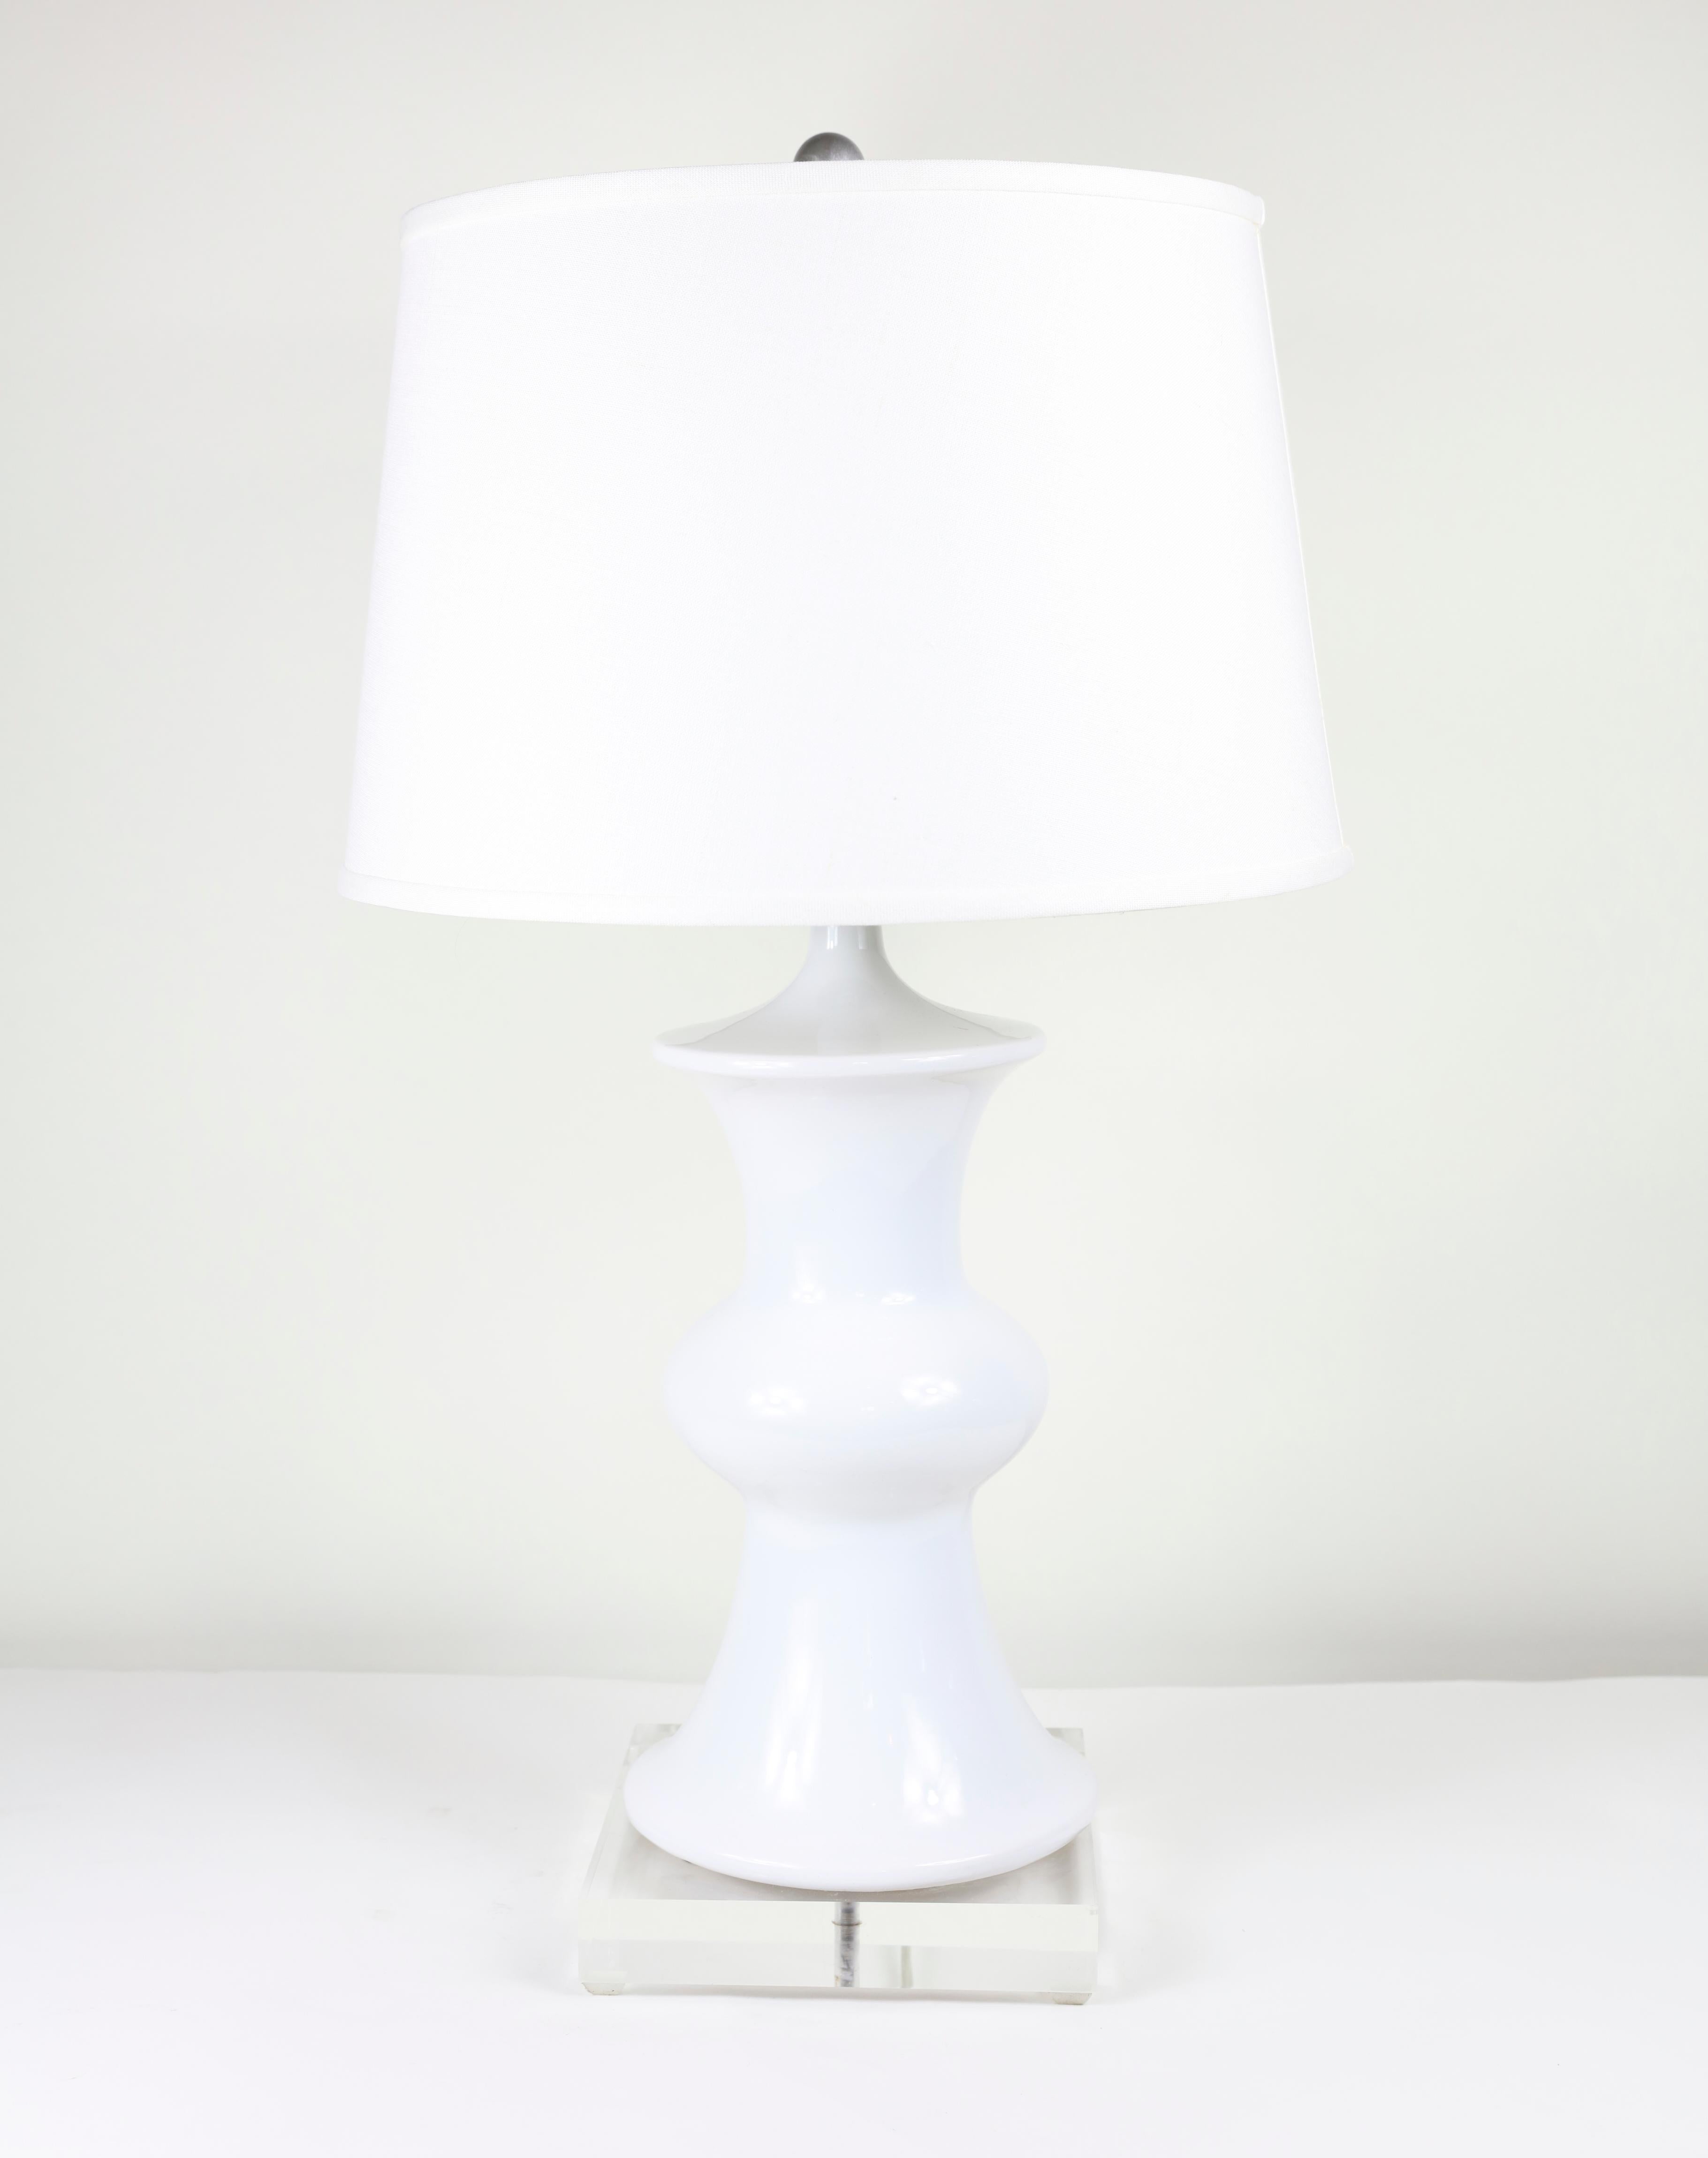 Pair of white stephen gerould table lamps with Lucite bases

8759-199

Measures: 29